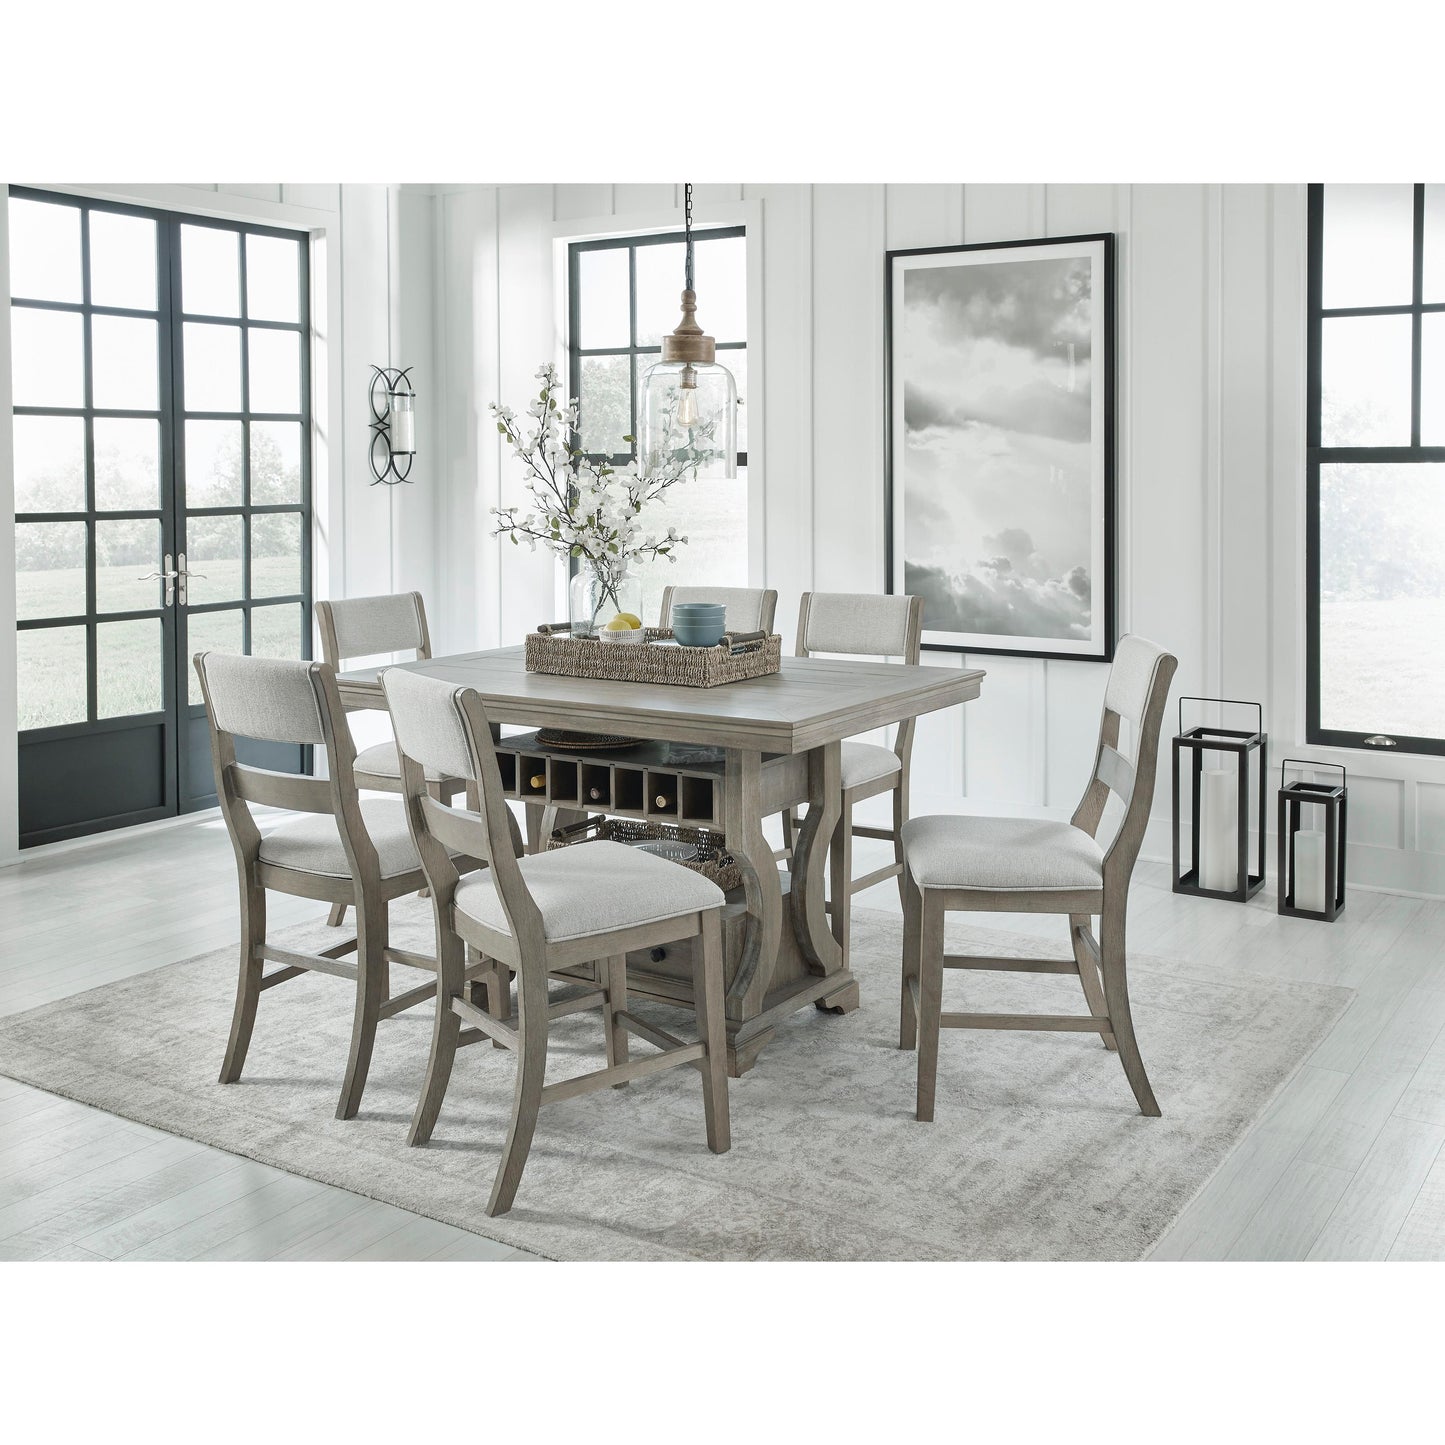 Signature Design by Ashley Moreshire D799 7 pc Counter Height Dining Set IMAGE 1